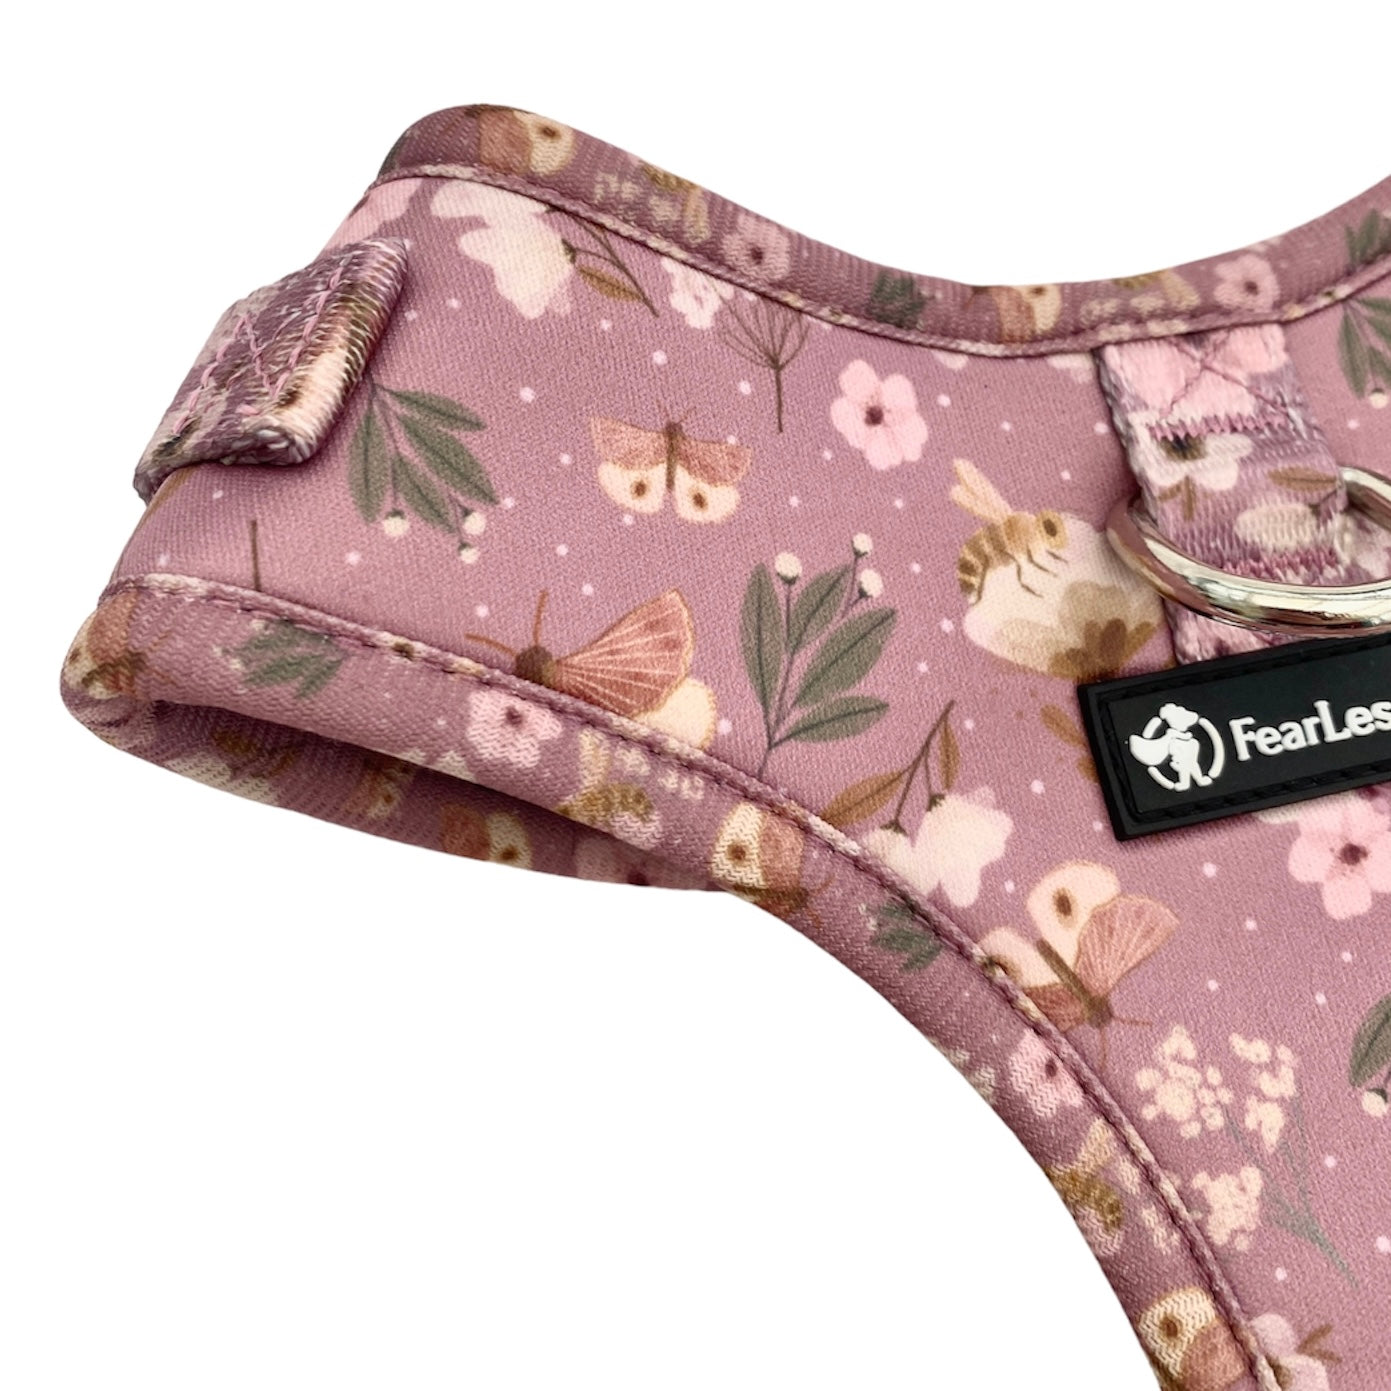 a close up photo of part of a no pull dog harness in dusty rose pink with butterflies and bees